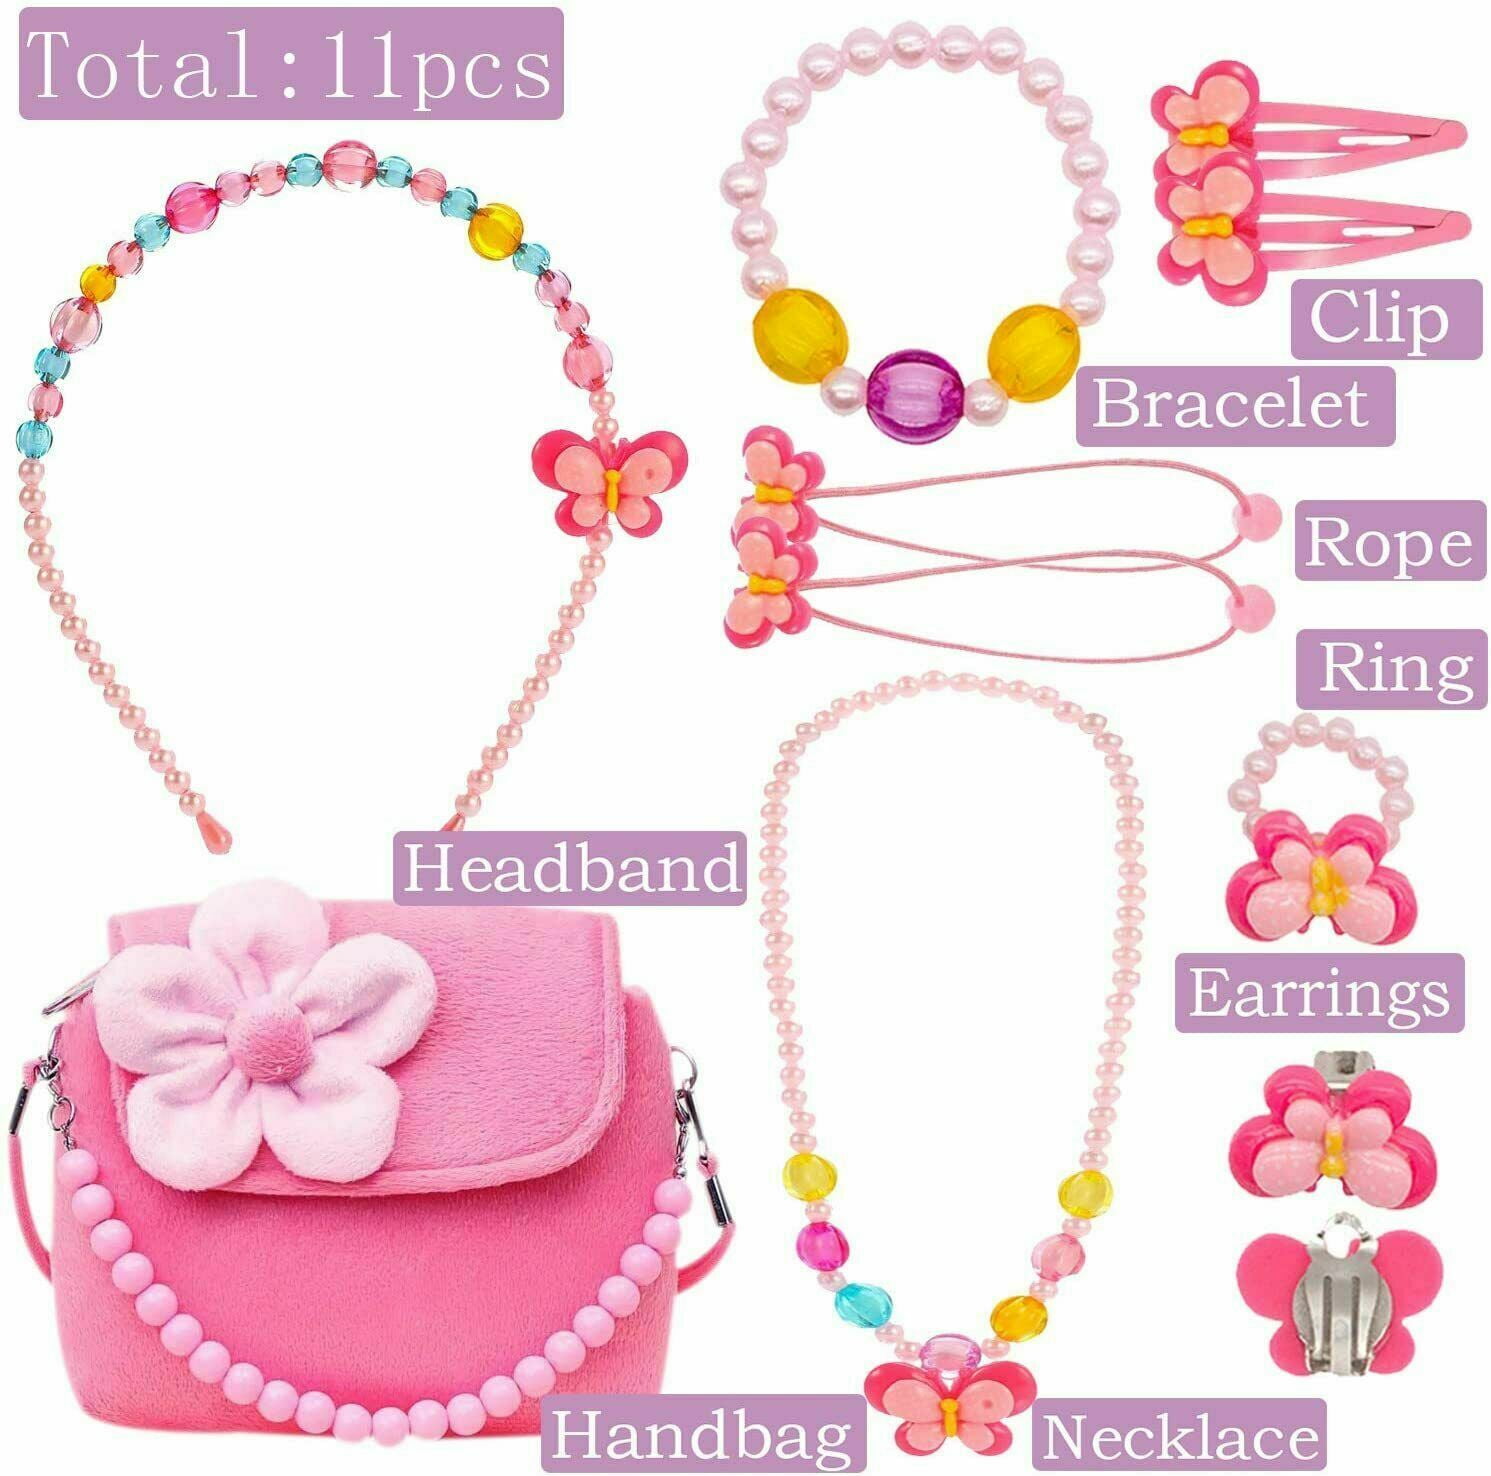 All Girls' Necklaces Accessories: Handbags, Jewelry & More